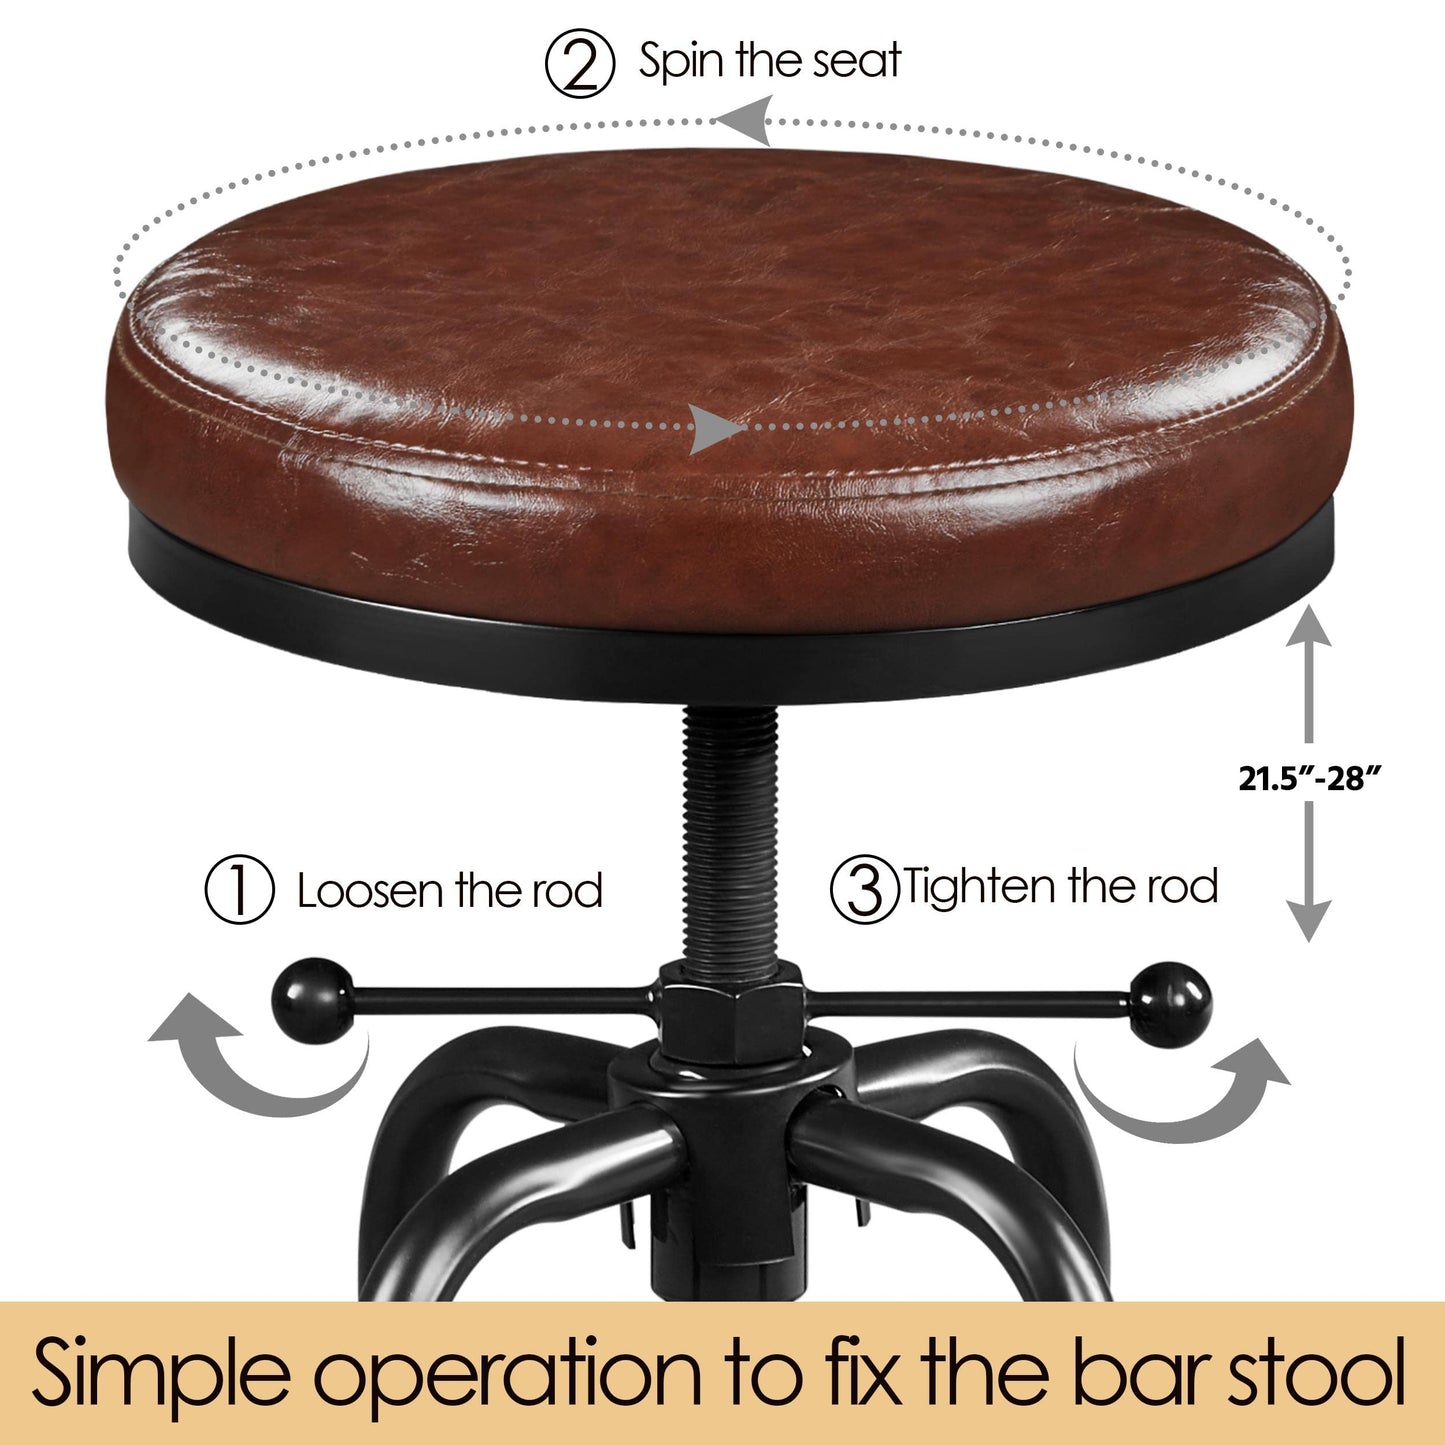 Yaheetech Industrial Bar Stool Vintage Counter Height Stool with Round Faux Leather Seat Metal Stool Adjustable Kitchen Stool 21.5-28 Inch Tall